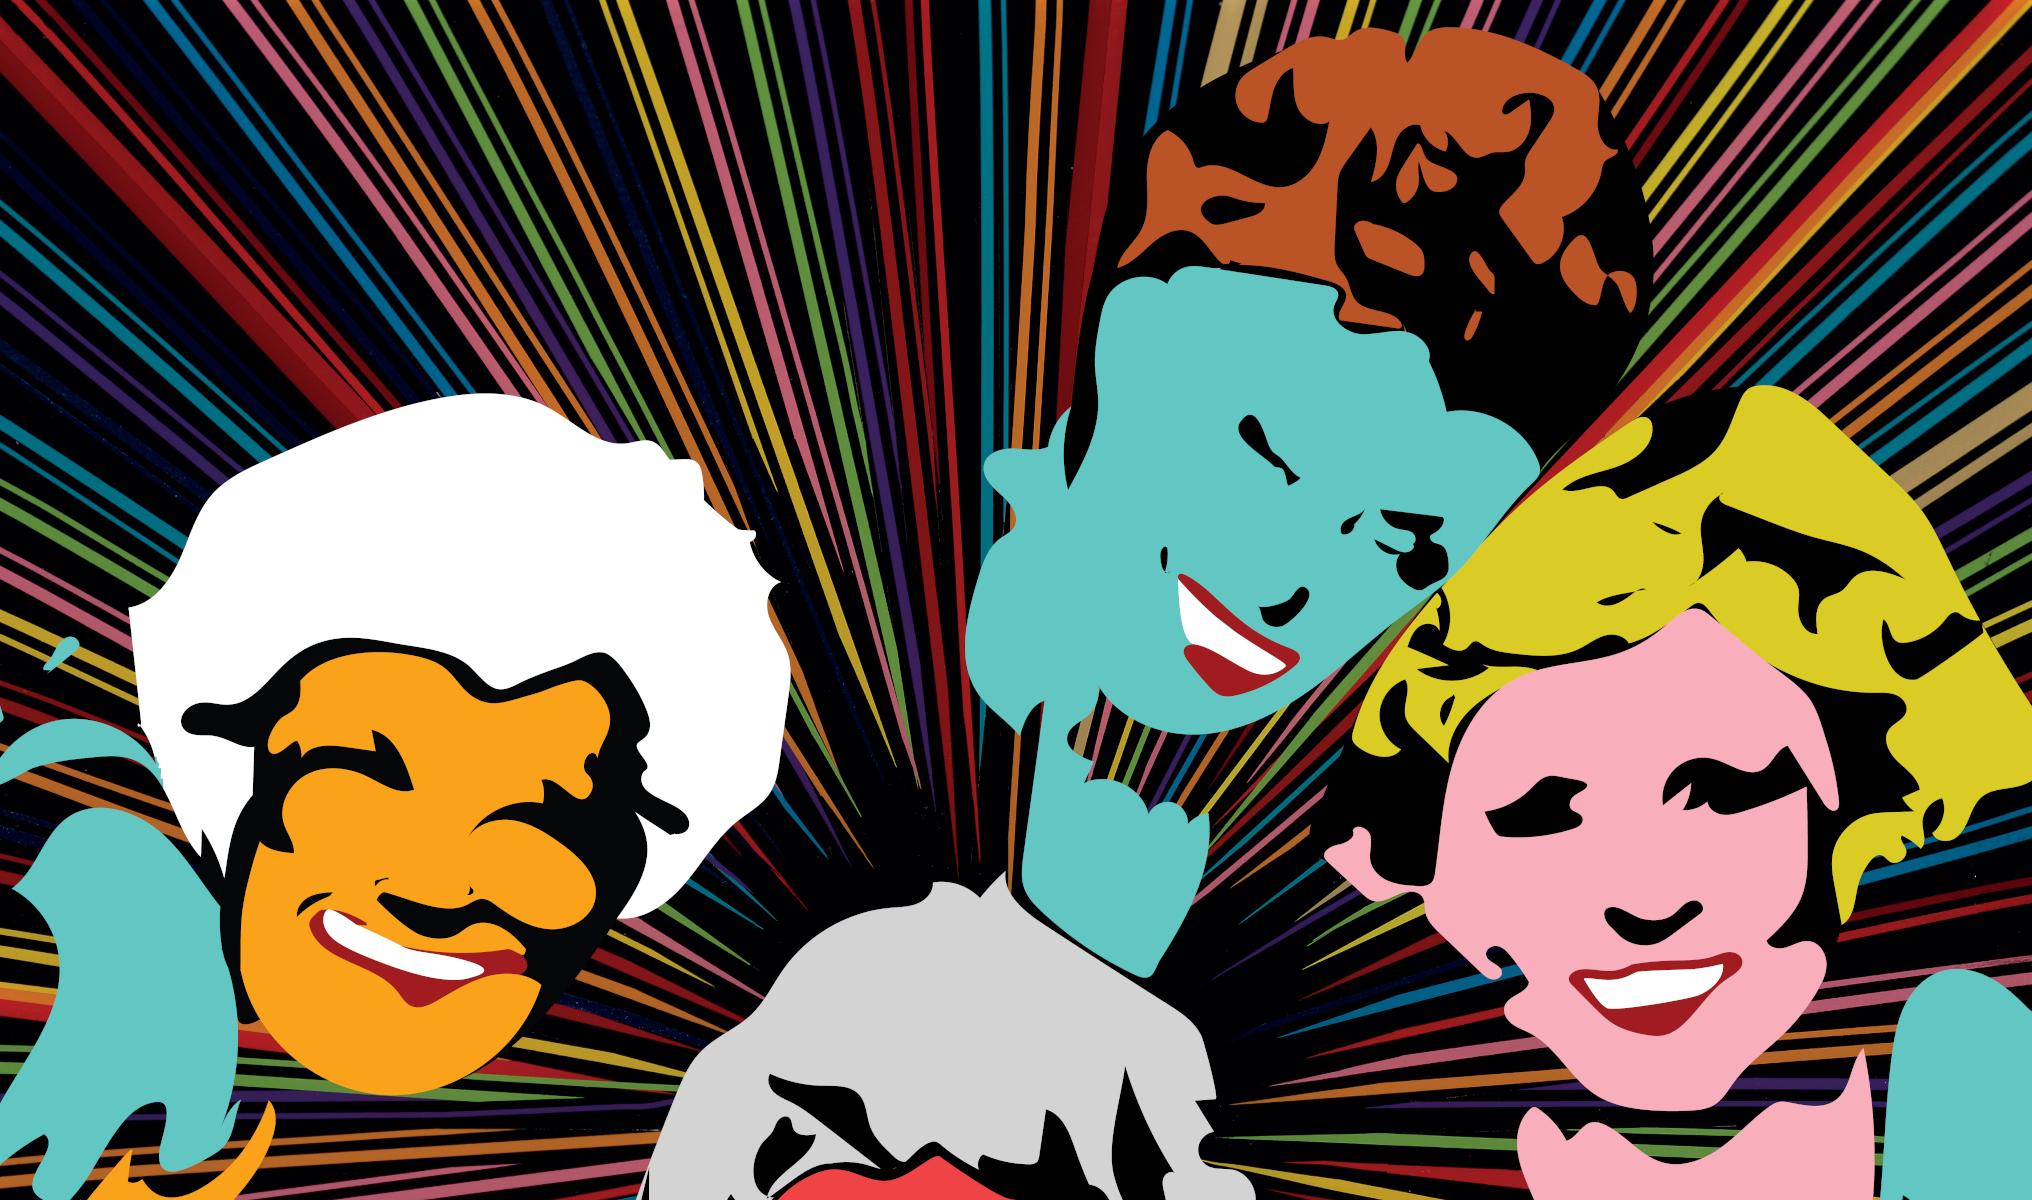              **ANNUAL SUPER SALE UNTIL JUNE 15TH ONLY**
*This Price Won't Be Repeated Again This Year - Take Advantage Of It*

Celebrating the beloved GOLDEN GIRLS on this pop art that only Oliveira can make and think of.

**IMPORTANT: This is a